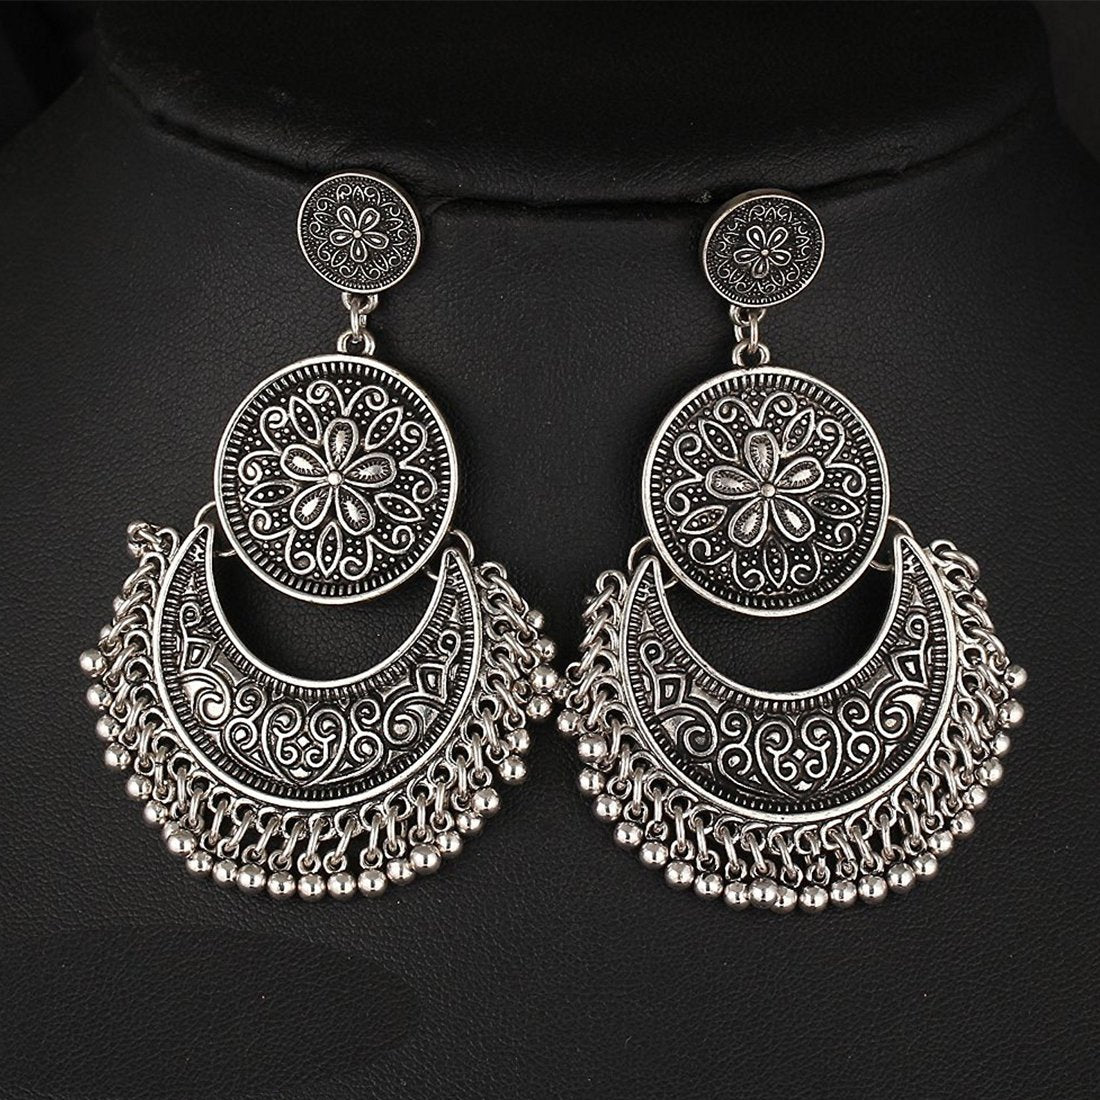 Yellow Chimes Oxidised Earrings for Women Tribal Muse Traditional Oxidised Silver ChandBali Earrings for Women and Girls